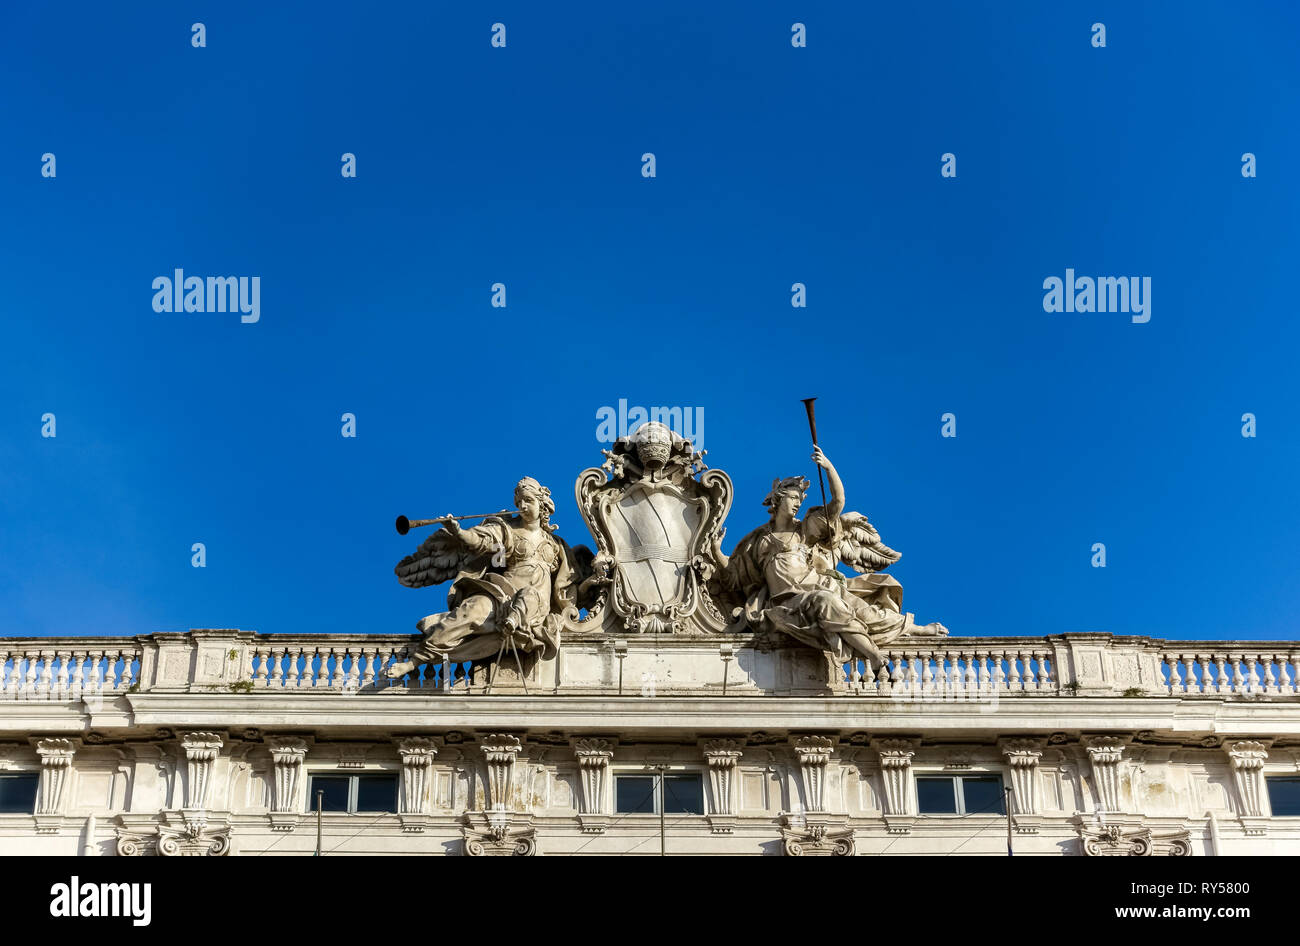 Constitutional Court of the Italian Republic. Palazzo della Consulta. Palace facade. Close up detail. Rome, Italy, Europe. Clear blue sky, copy space. Stock Photo